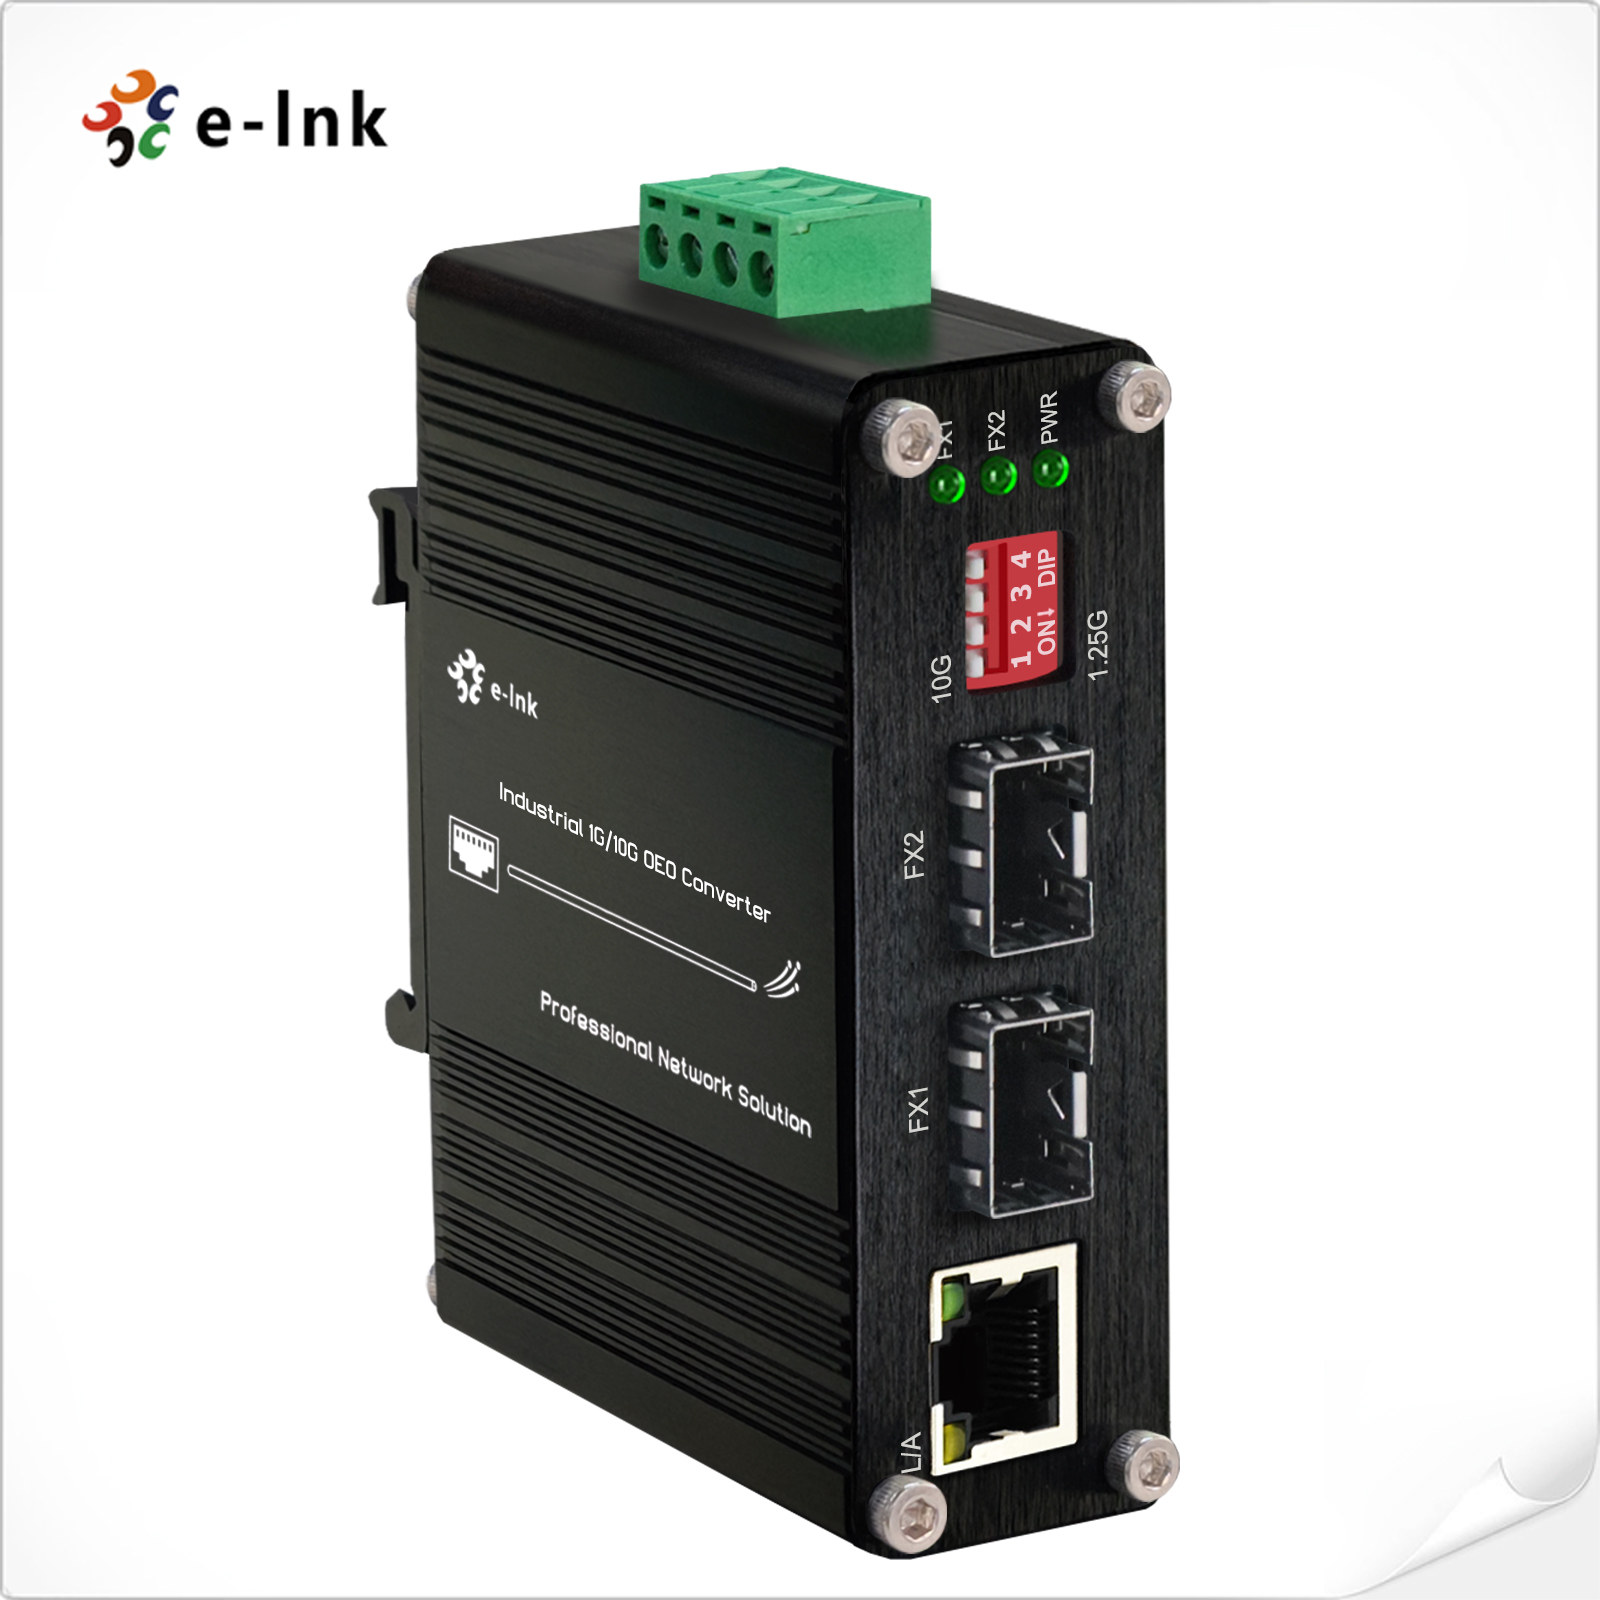 Industrial 1G/10G SFP+ to SFP+ OEO Converter (3R Repeater) with 1G Ethernet Media Converter Function